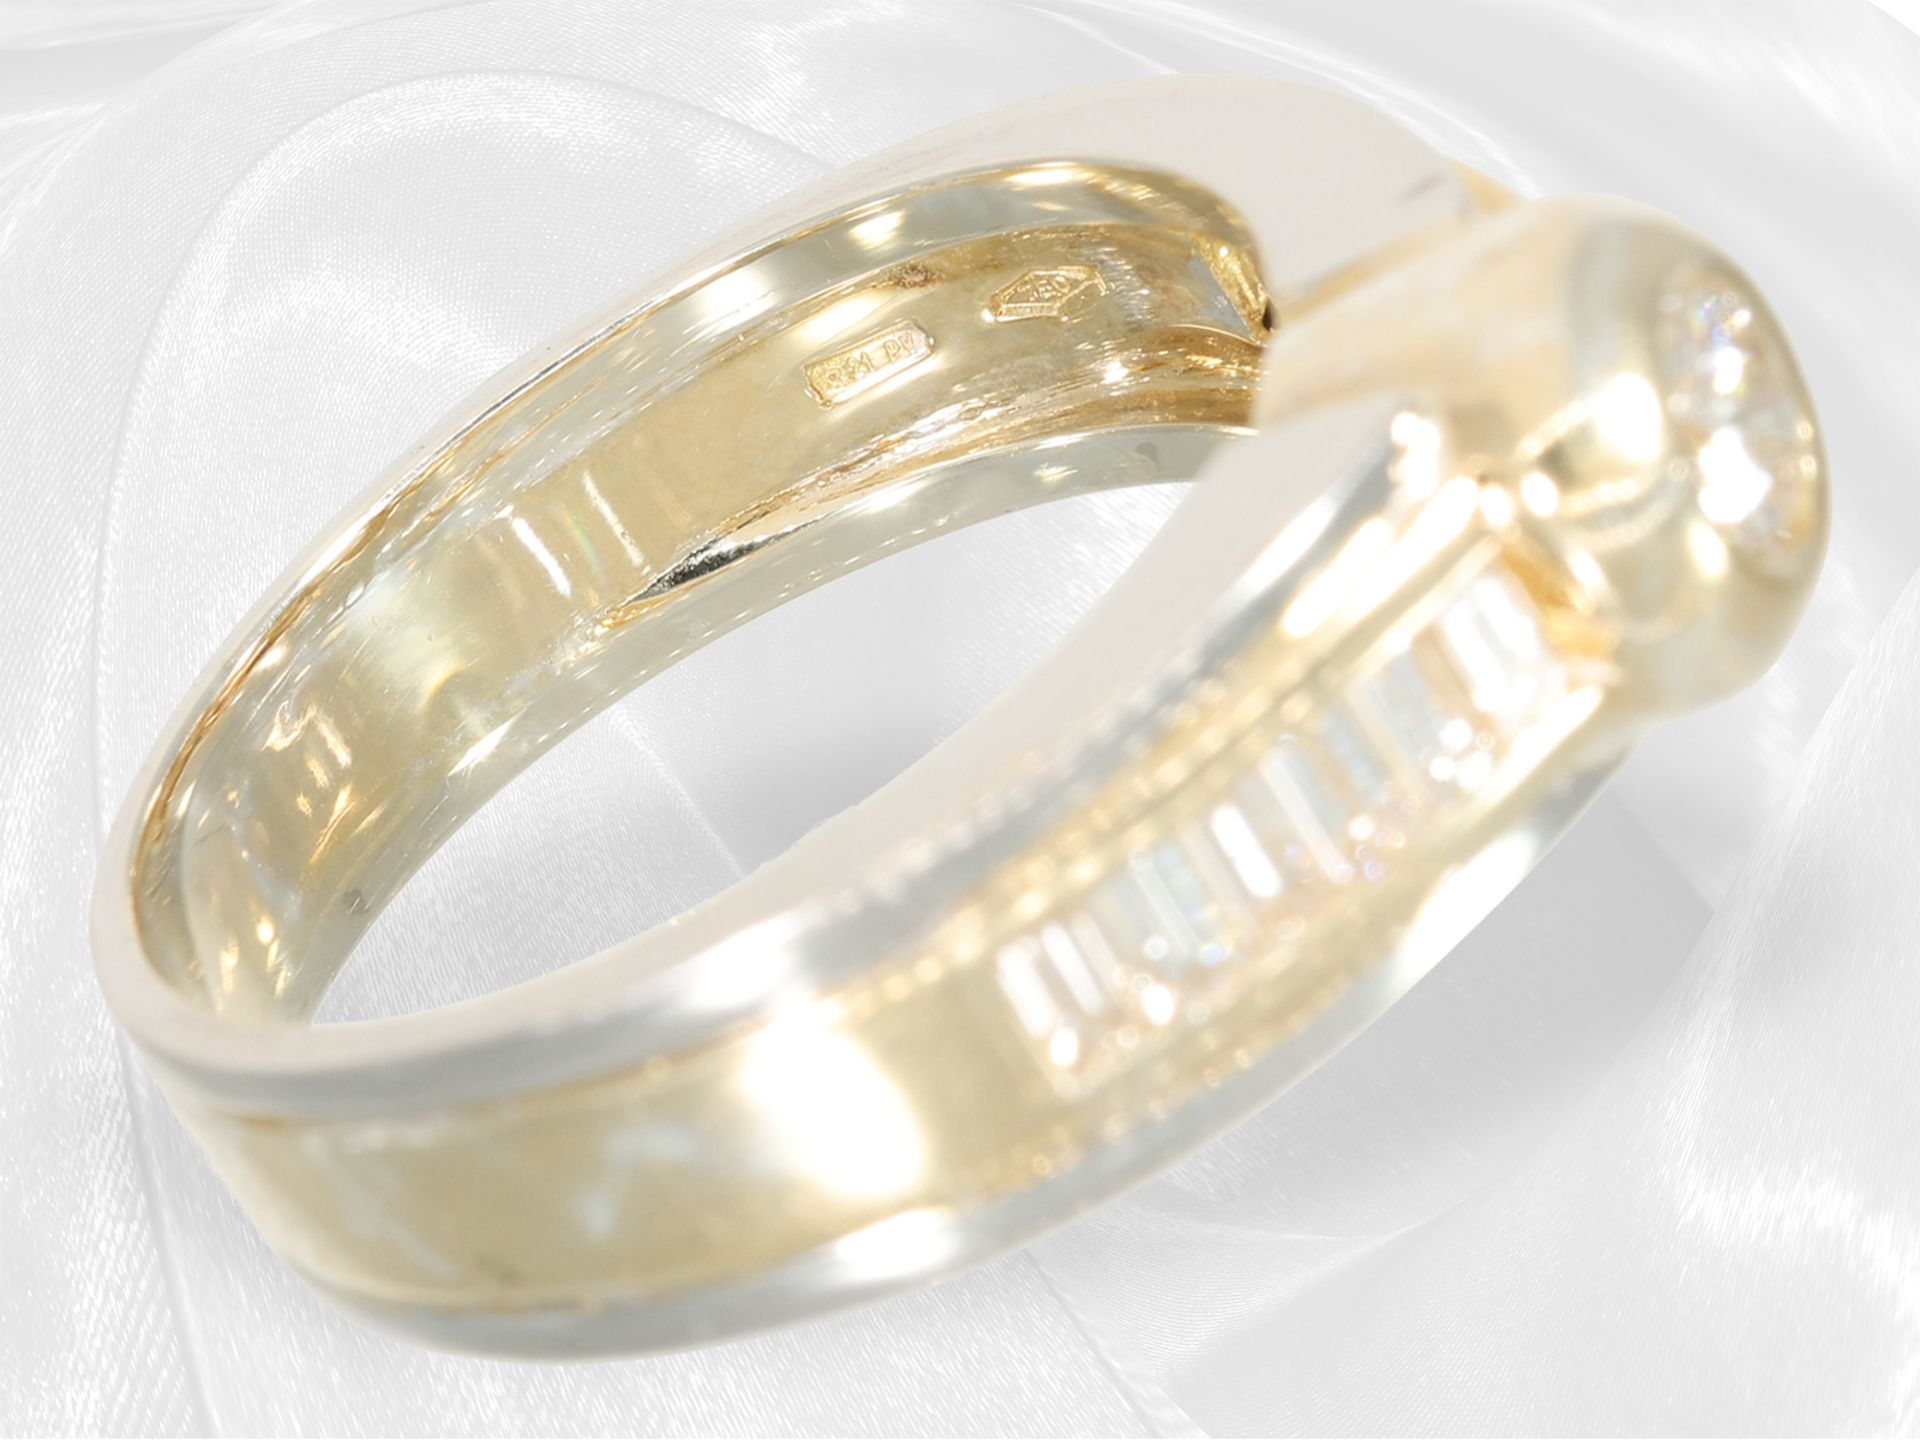 Solidly crafted designer goldsmith's ring with brilliant-cut diamonds, approx. 0.9ct, 18K gold, bico - Image 6 of 6